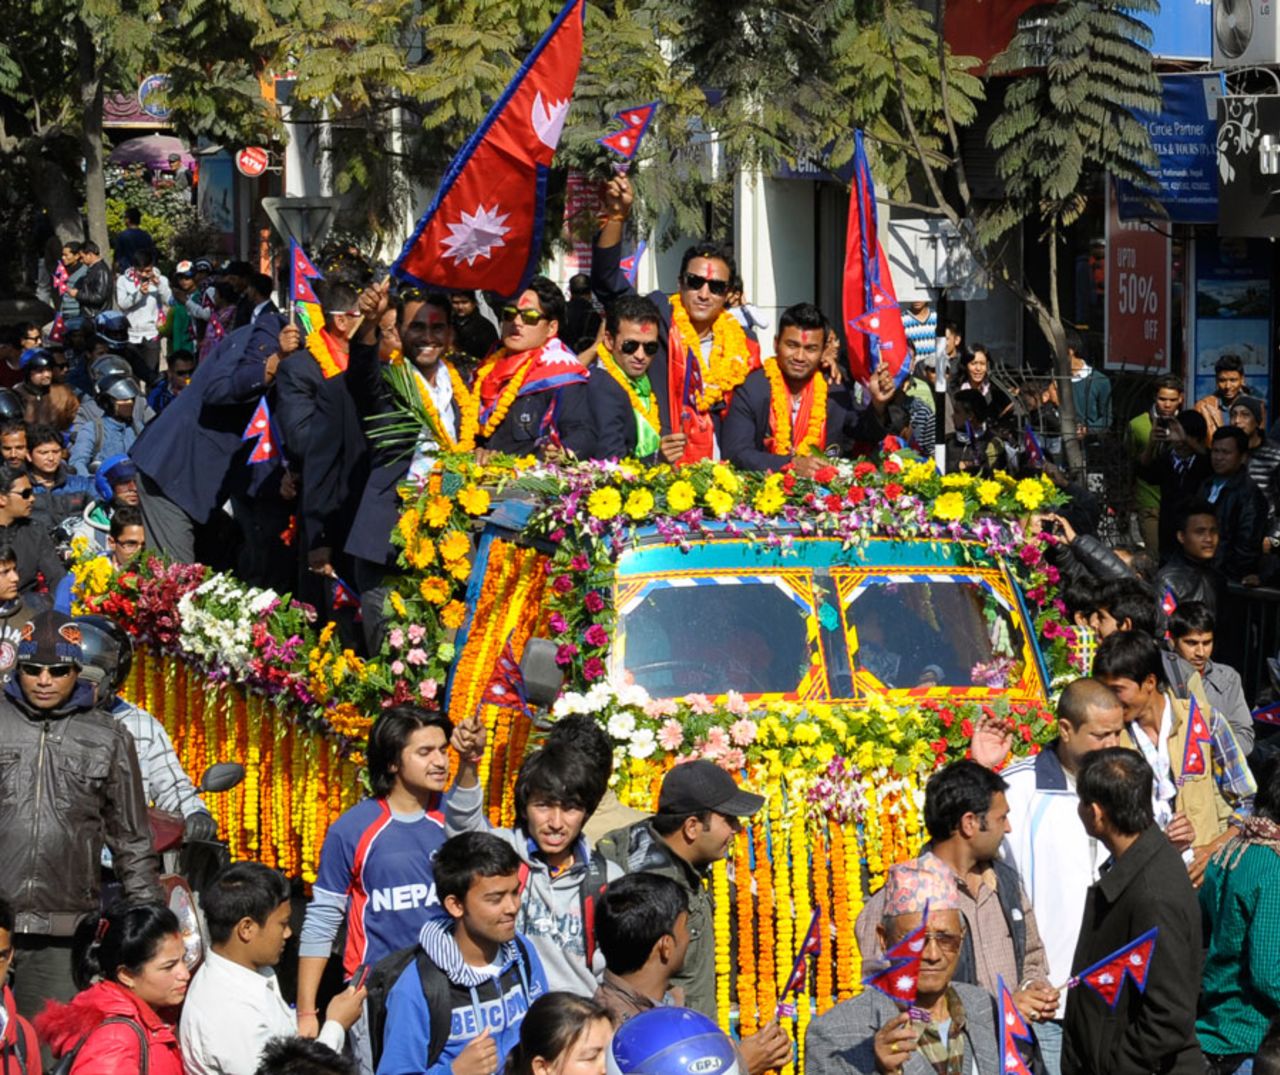 The Nepalese players return after a victorious ICC World Twenty20 Qualifier campaign, Kathmandu, December 4, 2013